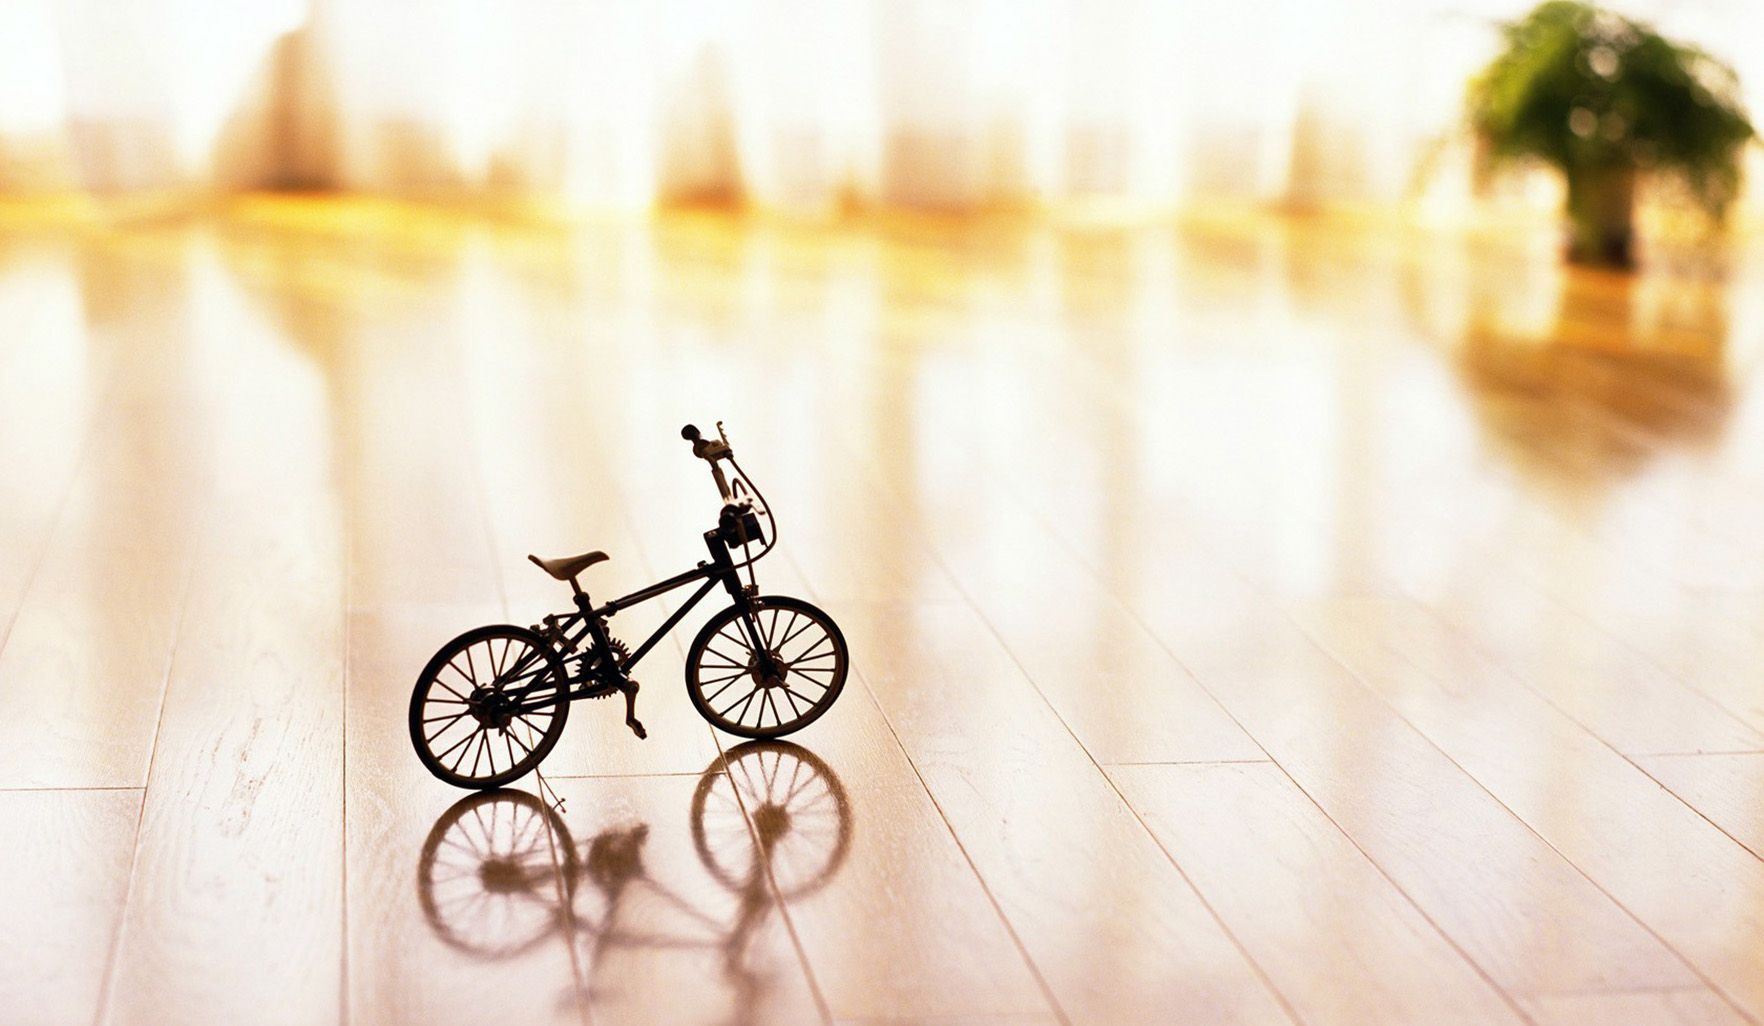 Mini Bicycles On The Table Wallpaper HD / Desktop and Mobile